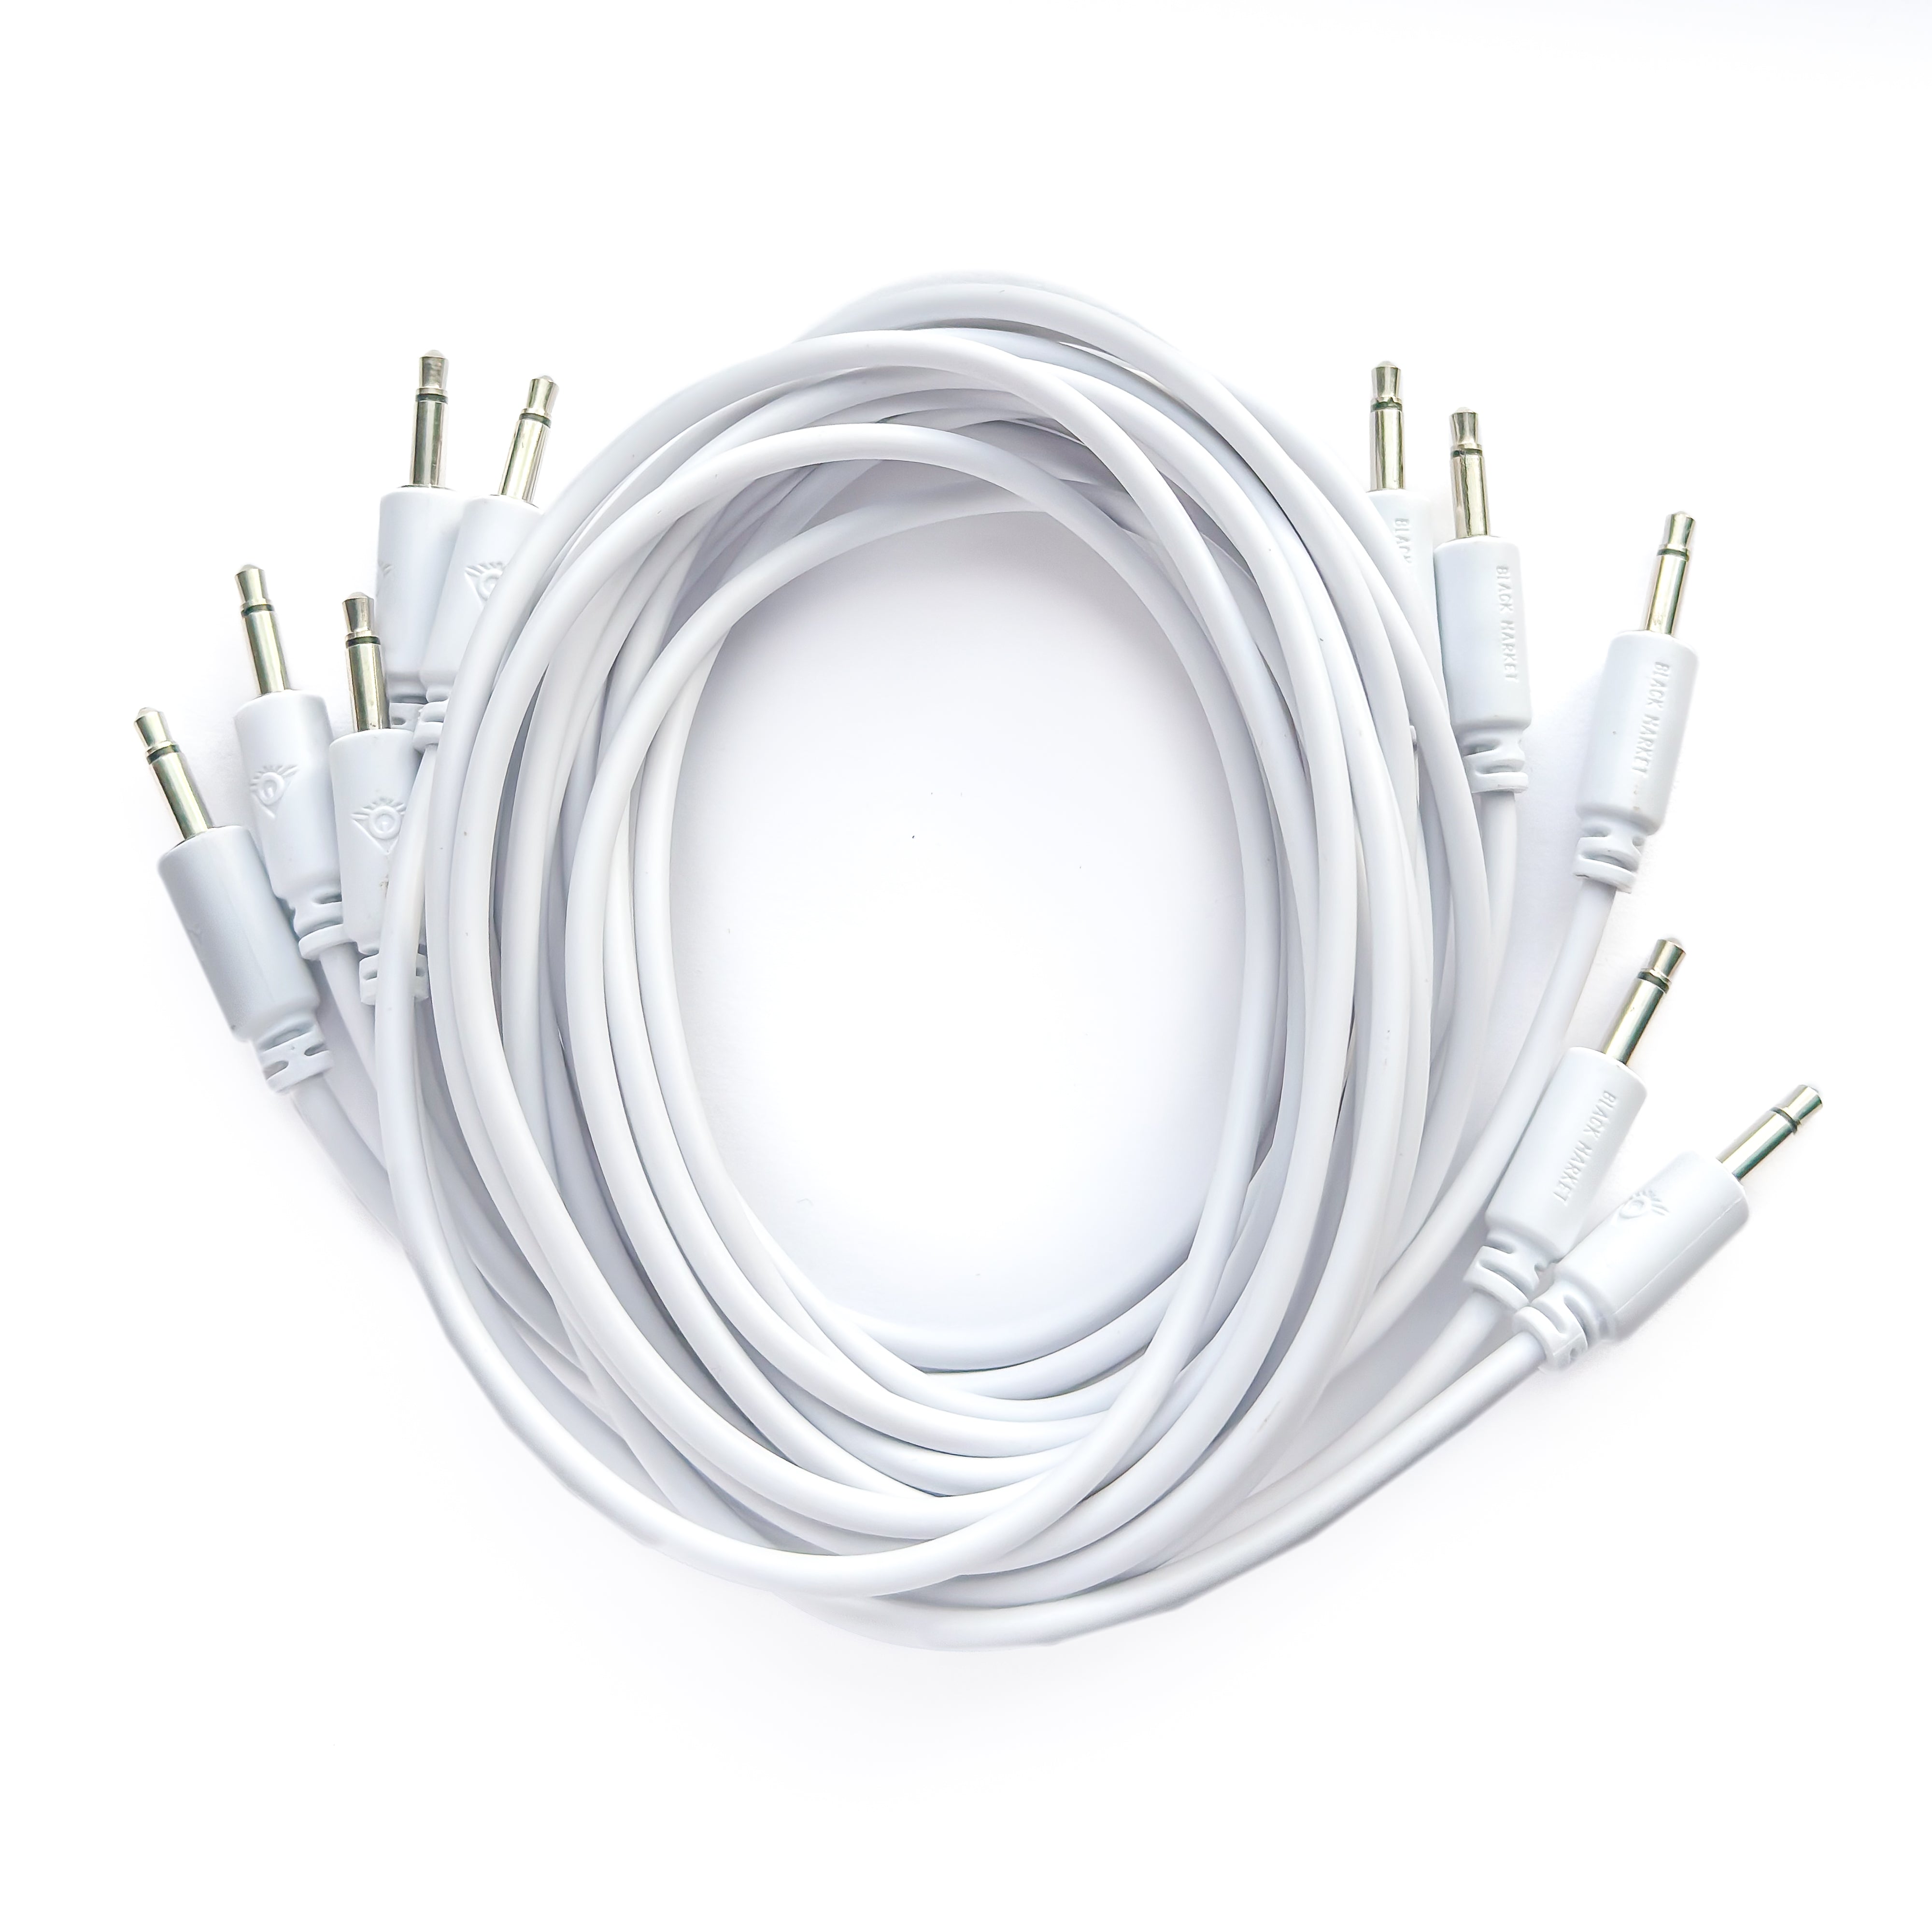 Black Market Modular 3.5mm Patch Cable 5-Pack - 100cm/40" - White View 1